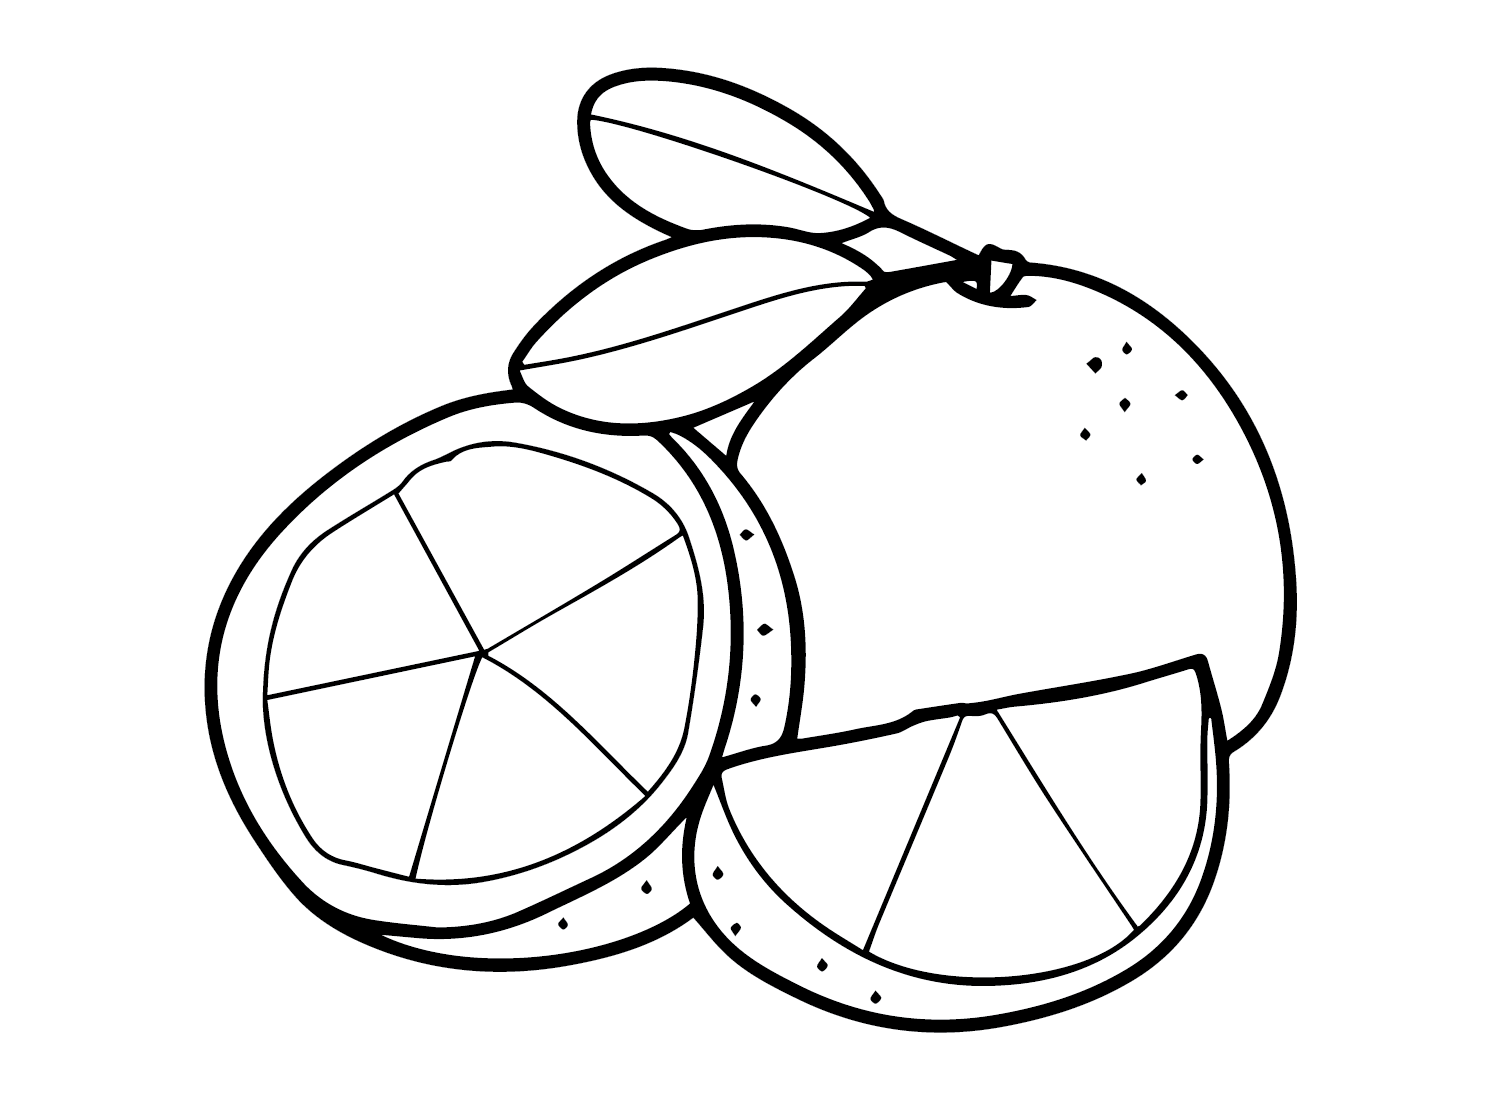 Pomelo Images 2 Coloring Page